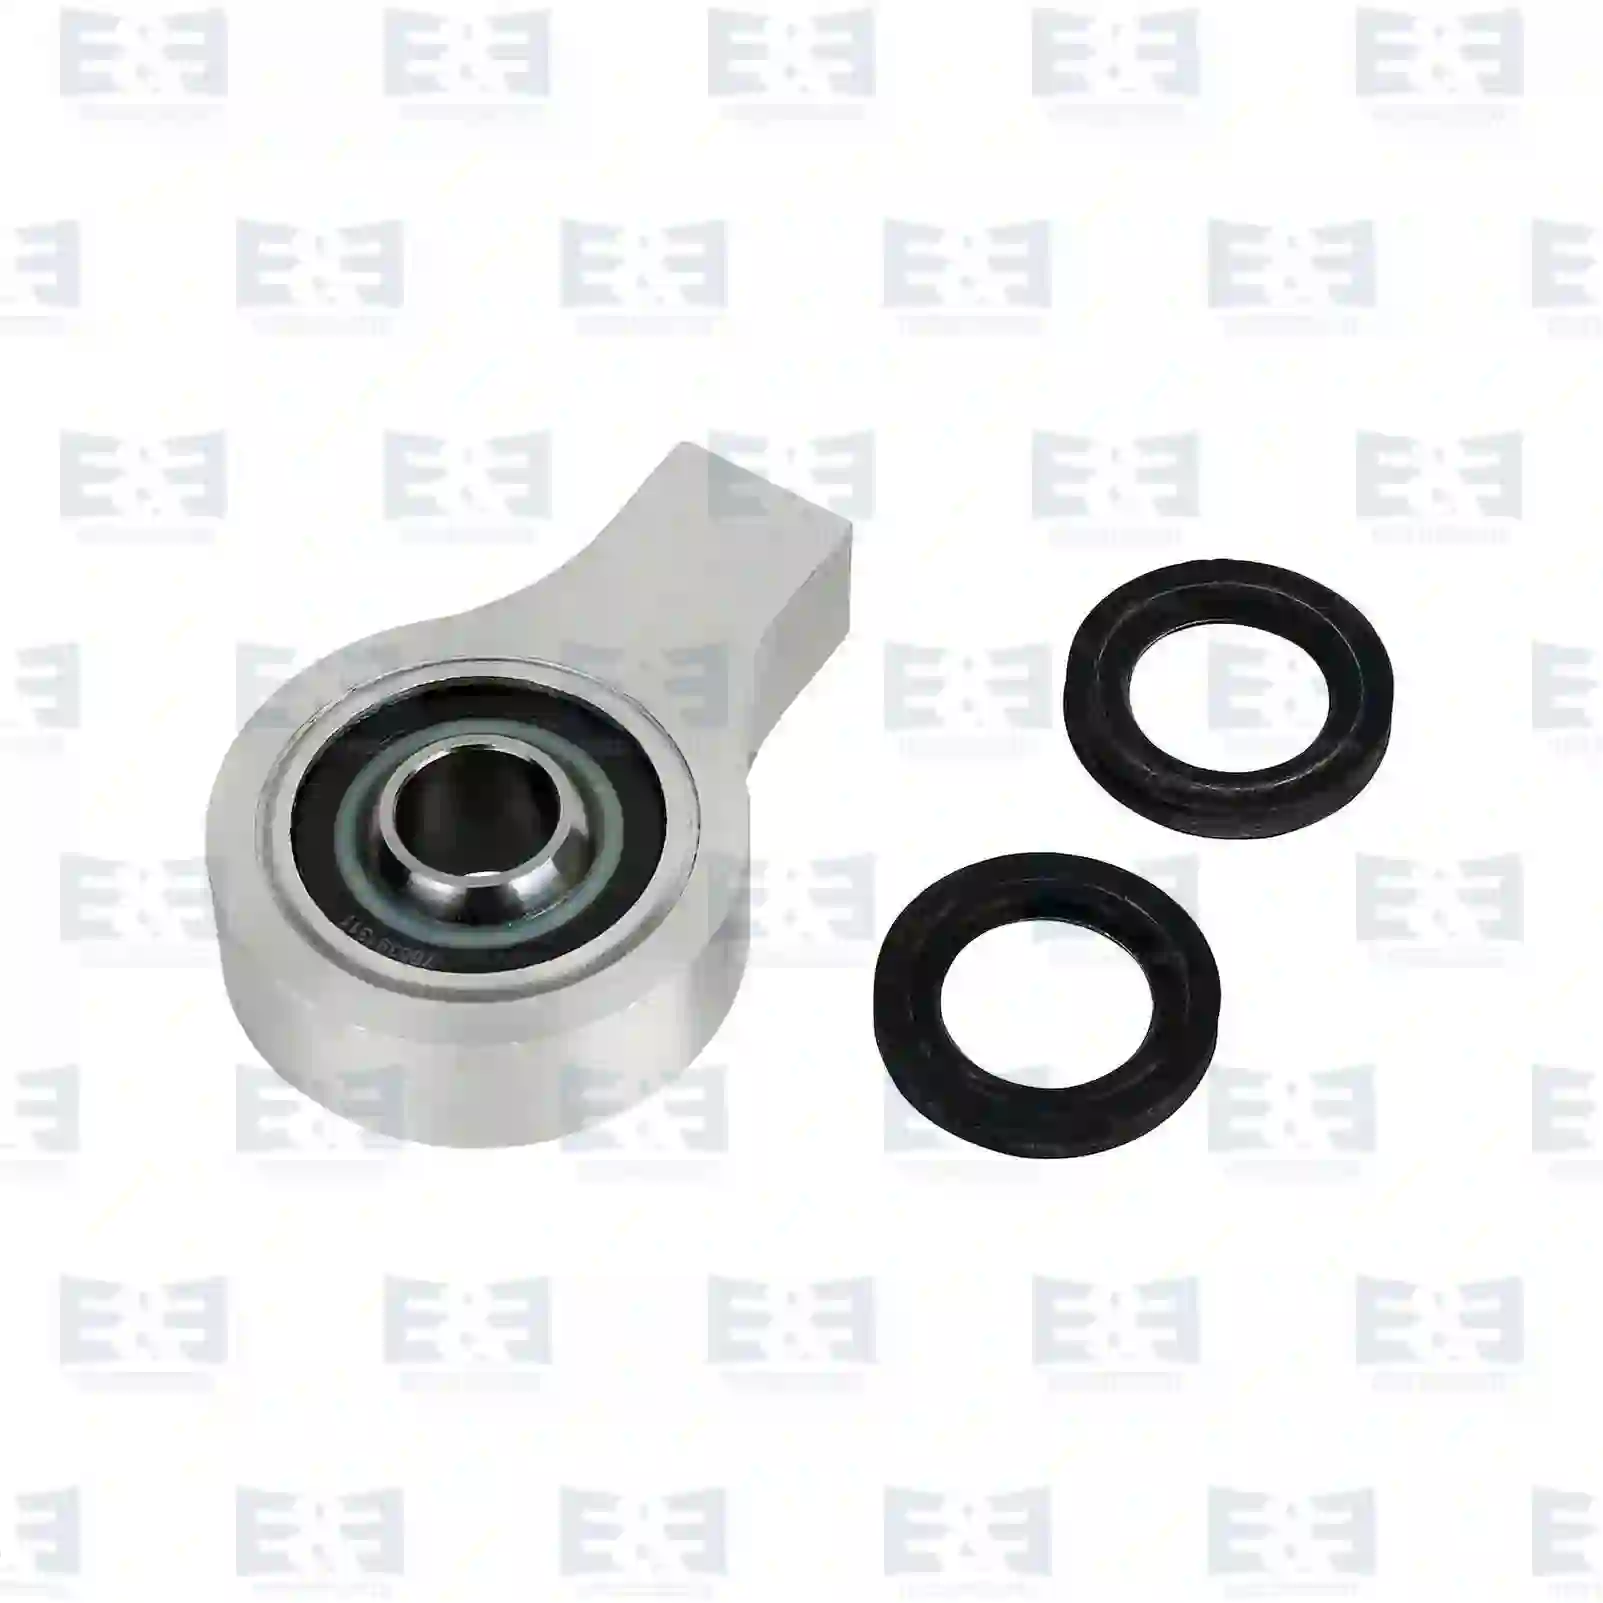 Bearing joint, complete with seal rings, 2E2274900, 2171712, ZG40855-0008, ||  2E2274900 E&E Truck Spare Parts | Truck Spare Parts, Auotomotive Spare Parts Bearing joint, complete with seal rings, 2E2274900, 2171712, ZG40855-0008, ||  2E2274900 E&E Truck Spare Parts | Truck Spare Parts, Auotomotive Spare Parts